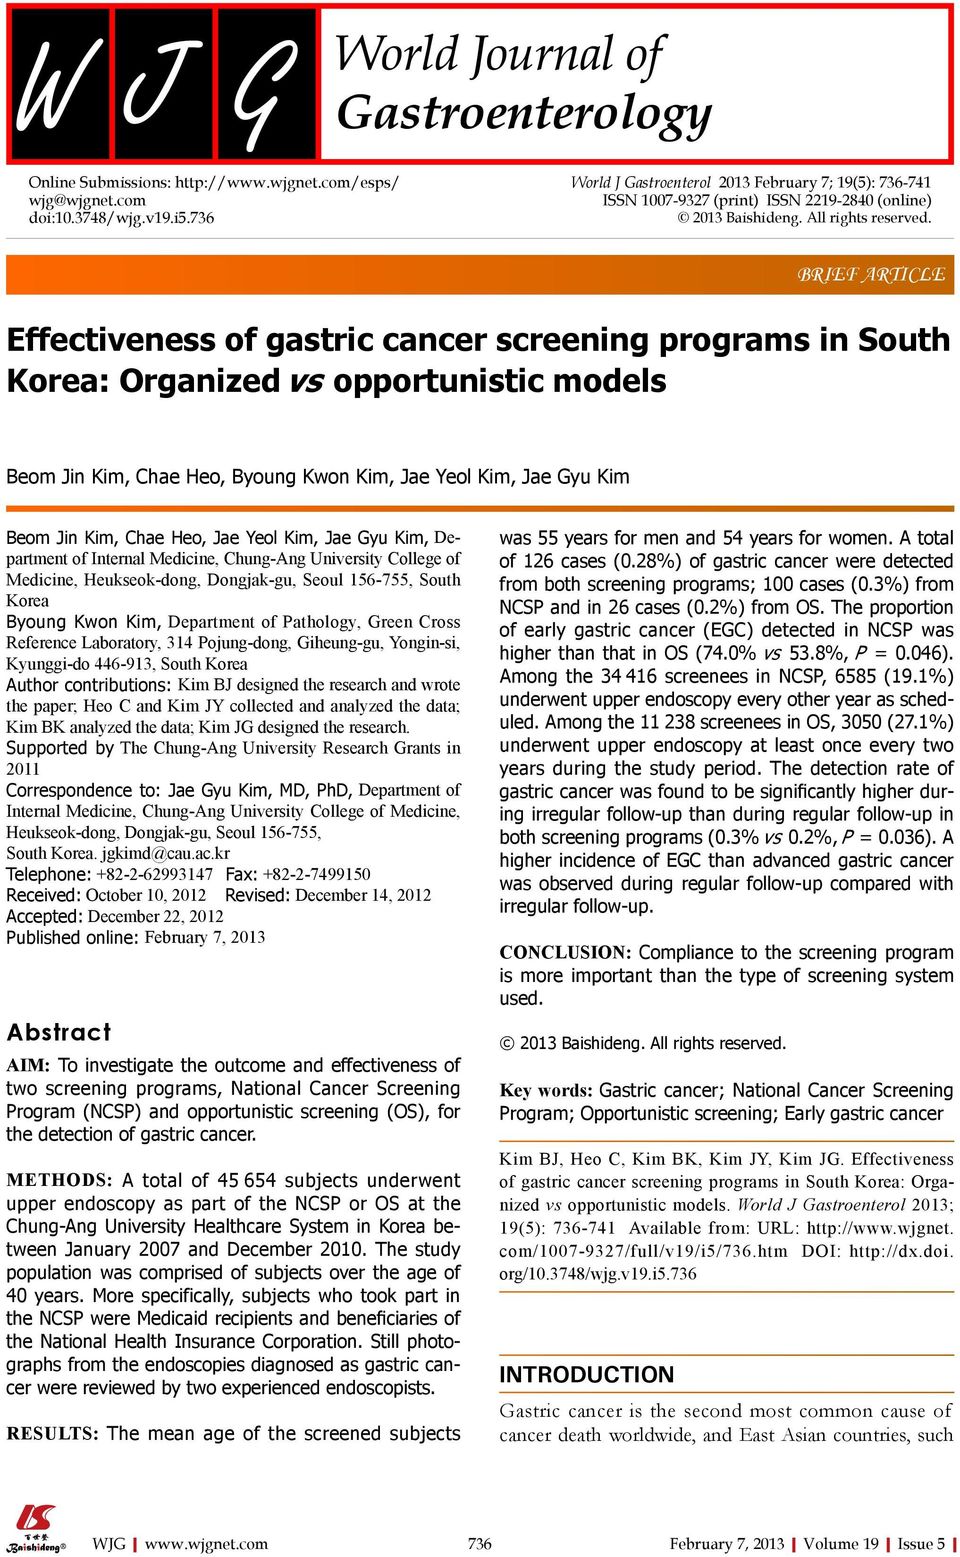 BRIEF ARTICLE Effectiveness of gastric cancer screening programs in South Korea: Organized vs opportunistic models Beom Jin Kim, Chae Heo, Byoung Kwon Kim, Jae Yeol Kim, Jae Gyu Kim Beom Jin Kim,